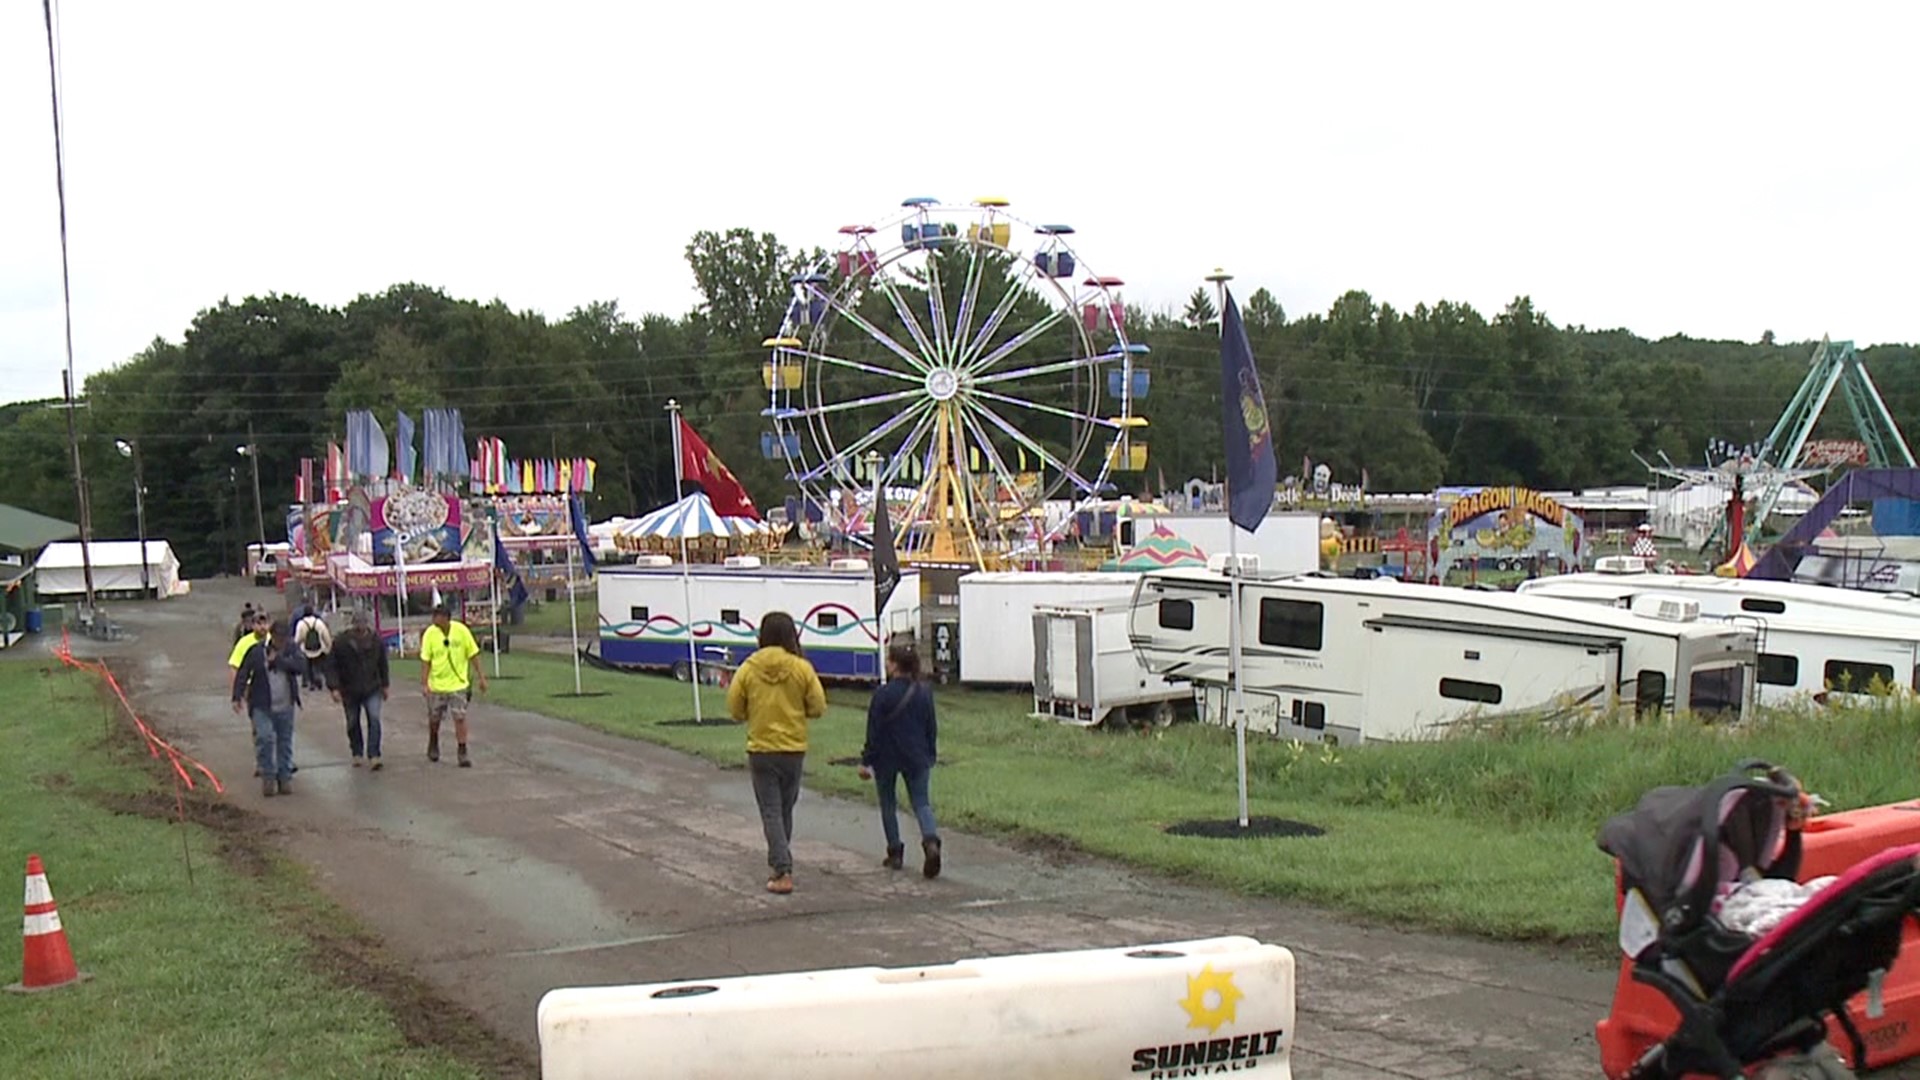 First night for the Luzerne County Fair